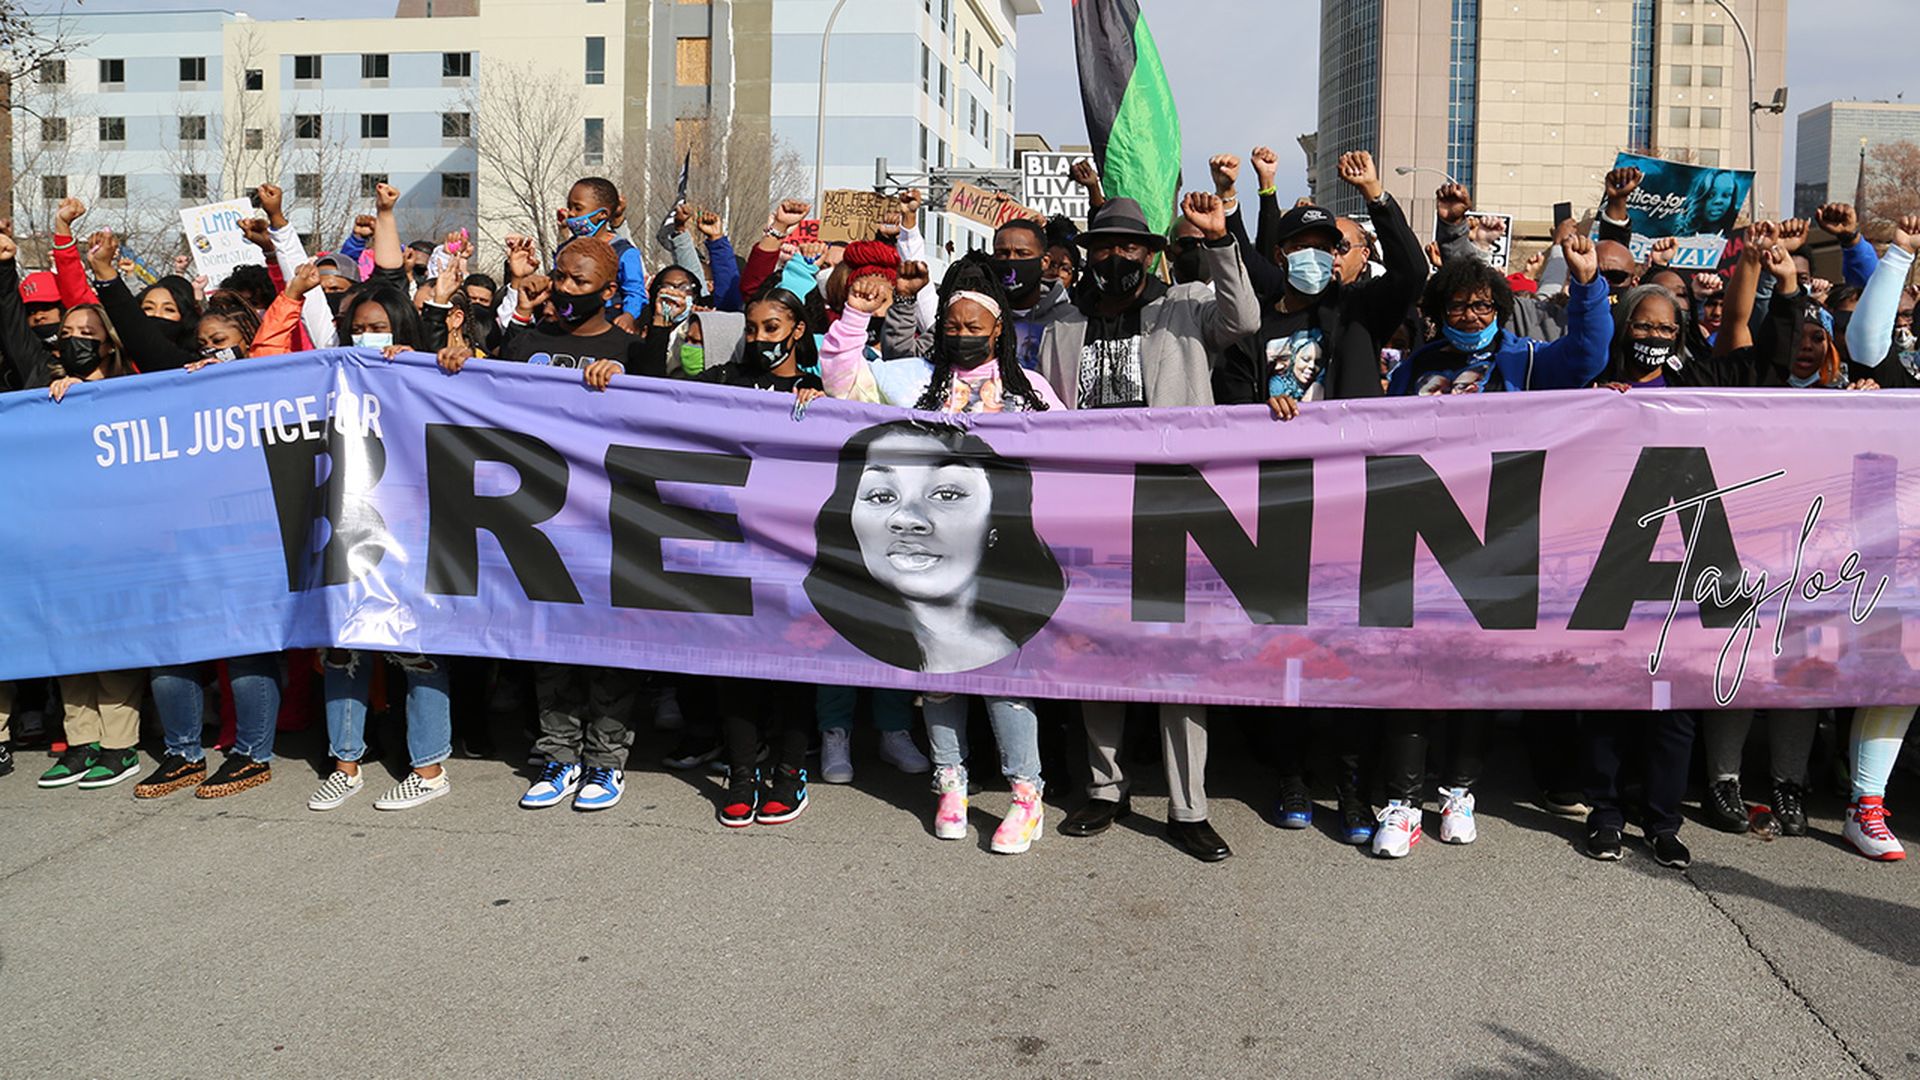 Breonna Taylor's family leads a march as they mark one year since her death. Photo: Laurin-Whitney Gottbrath